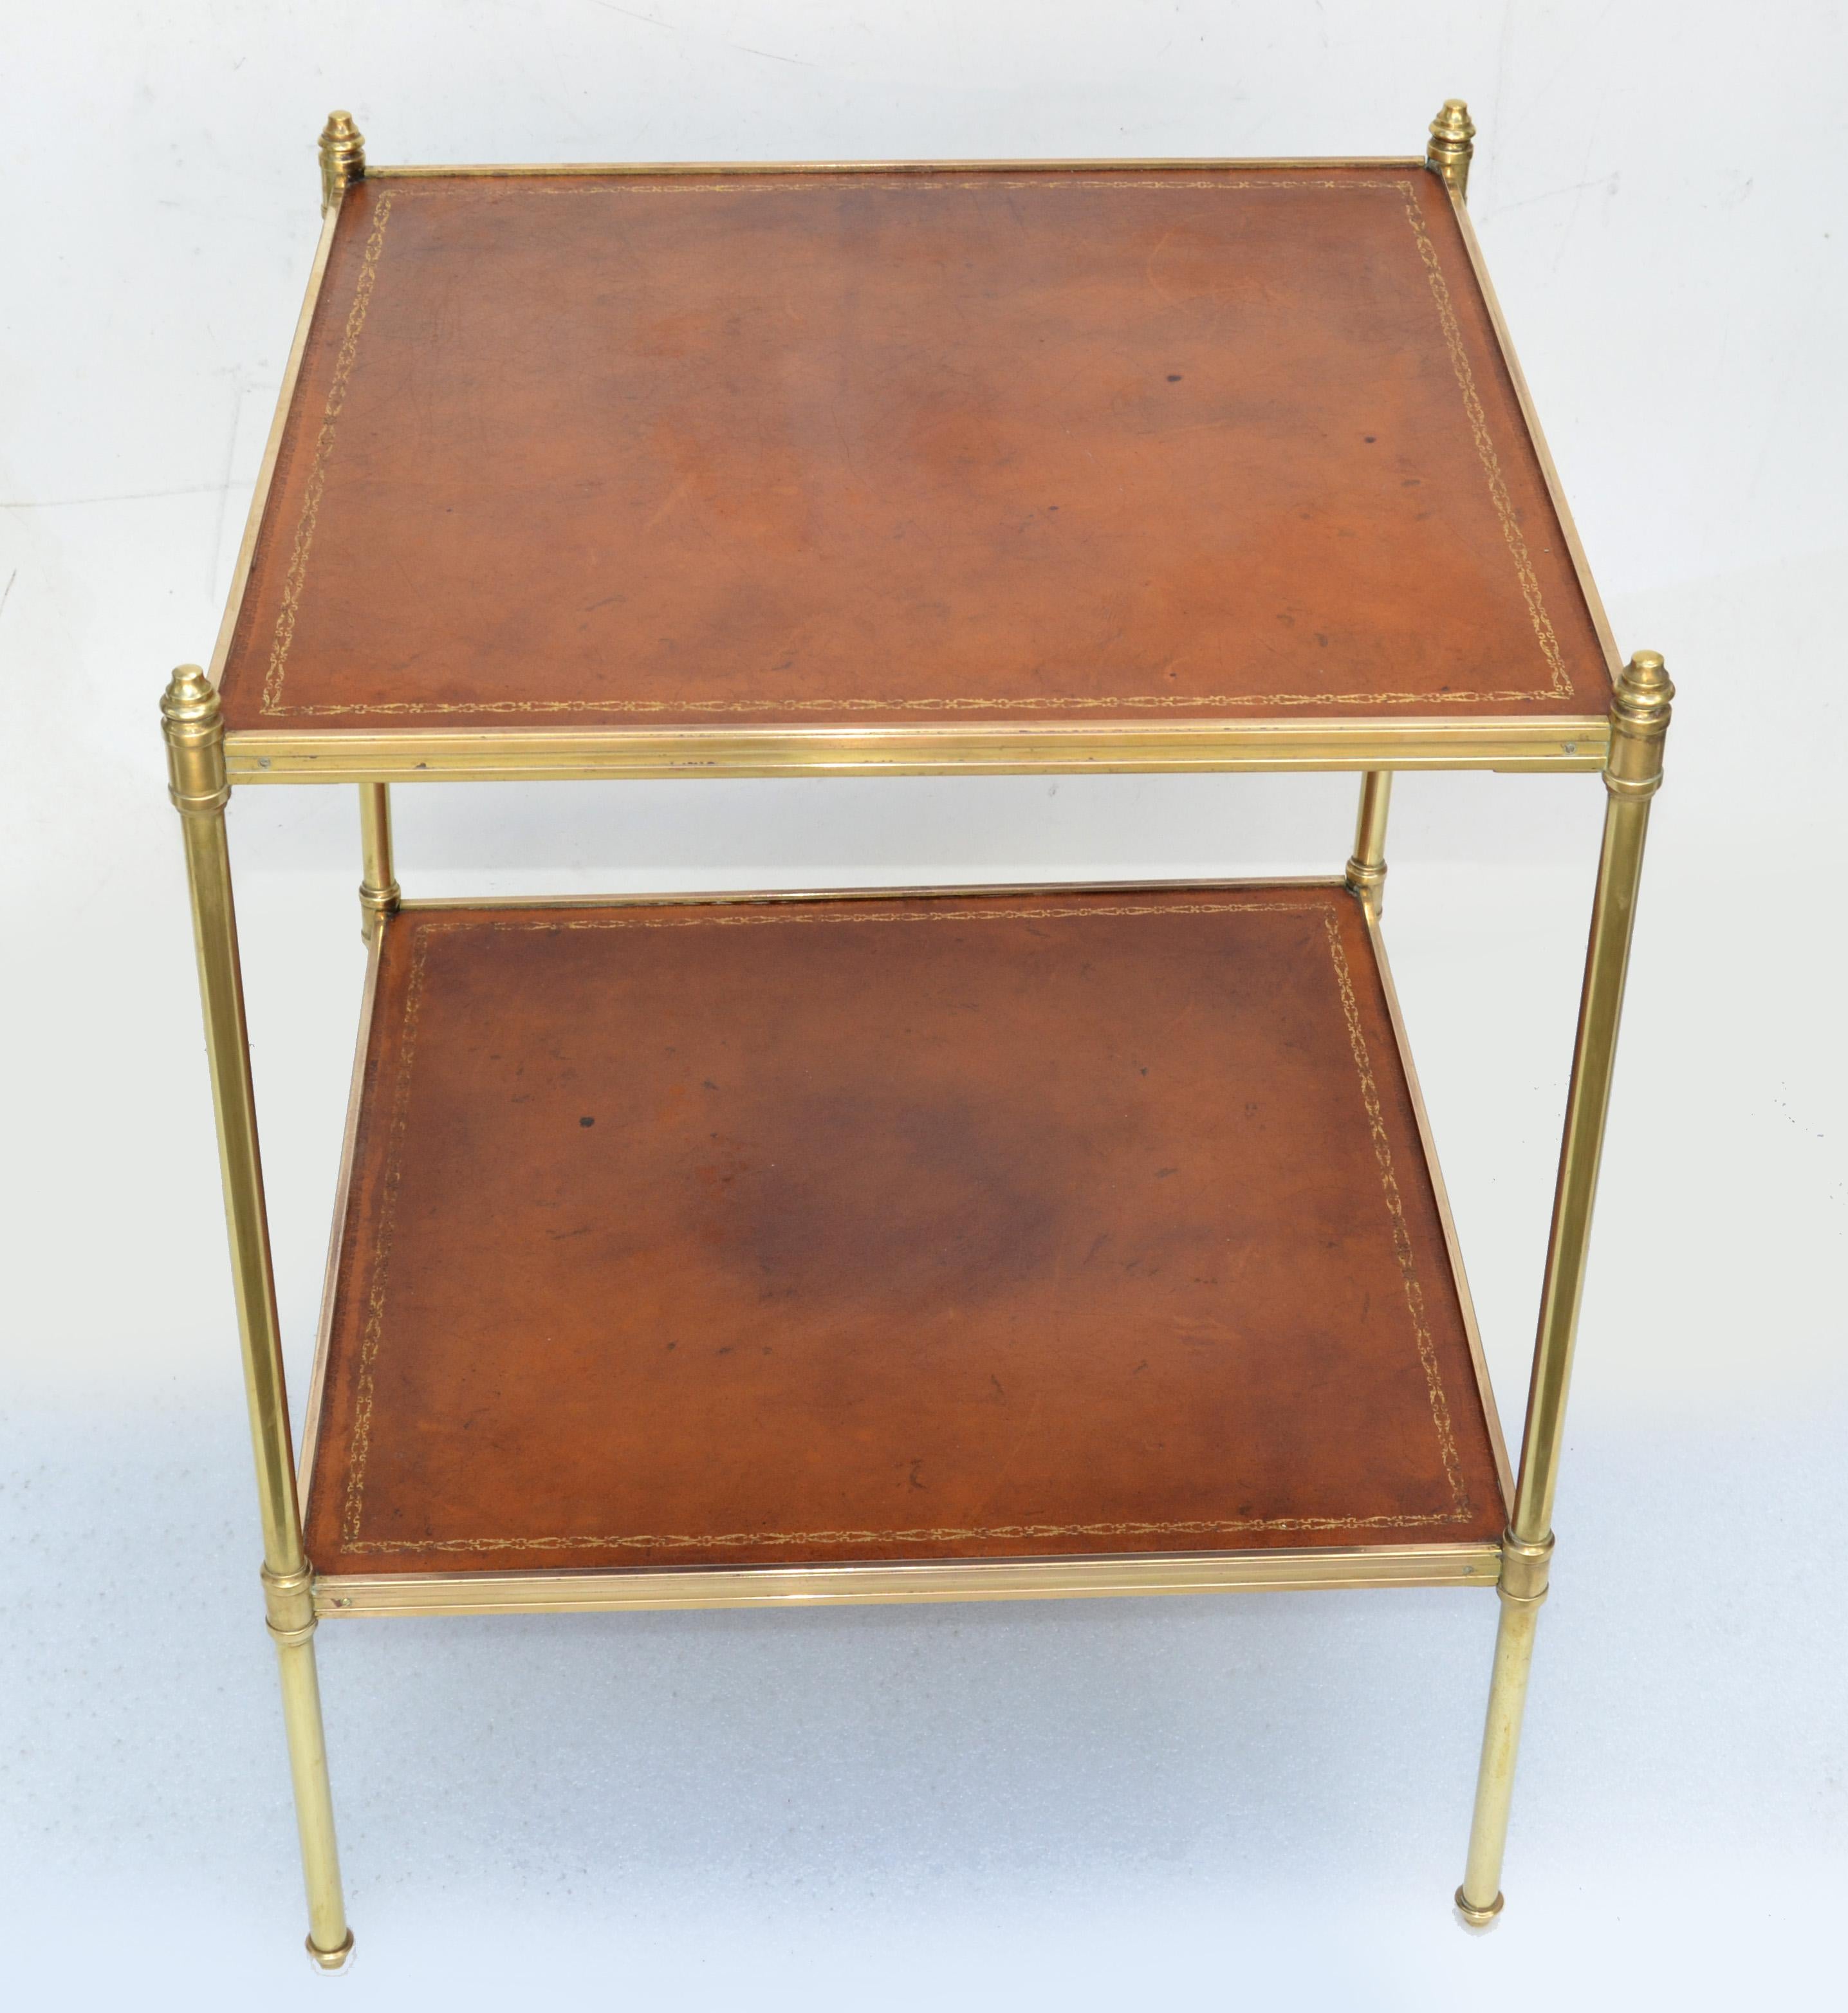 Maison Jansen Neoclassical 2 Tier Square Leather Top Side End Table France In Good Condition For Sale In Miami, FL